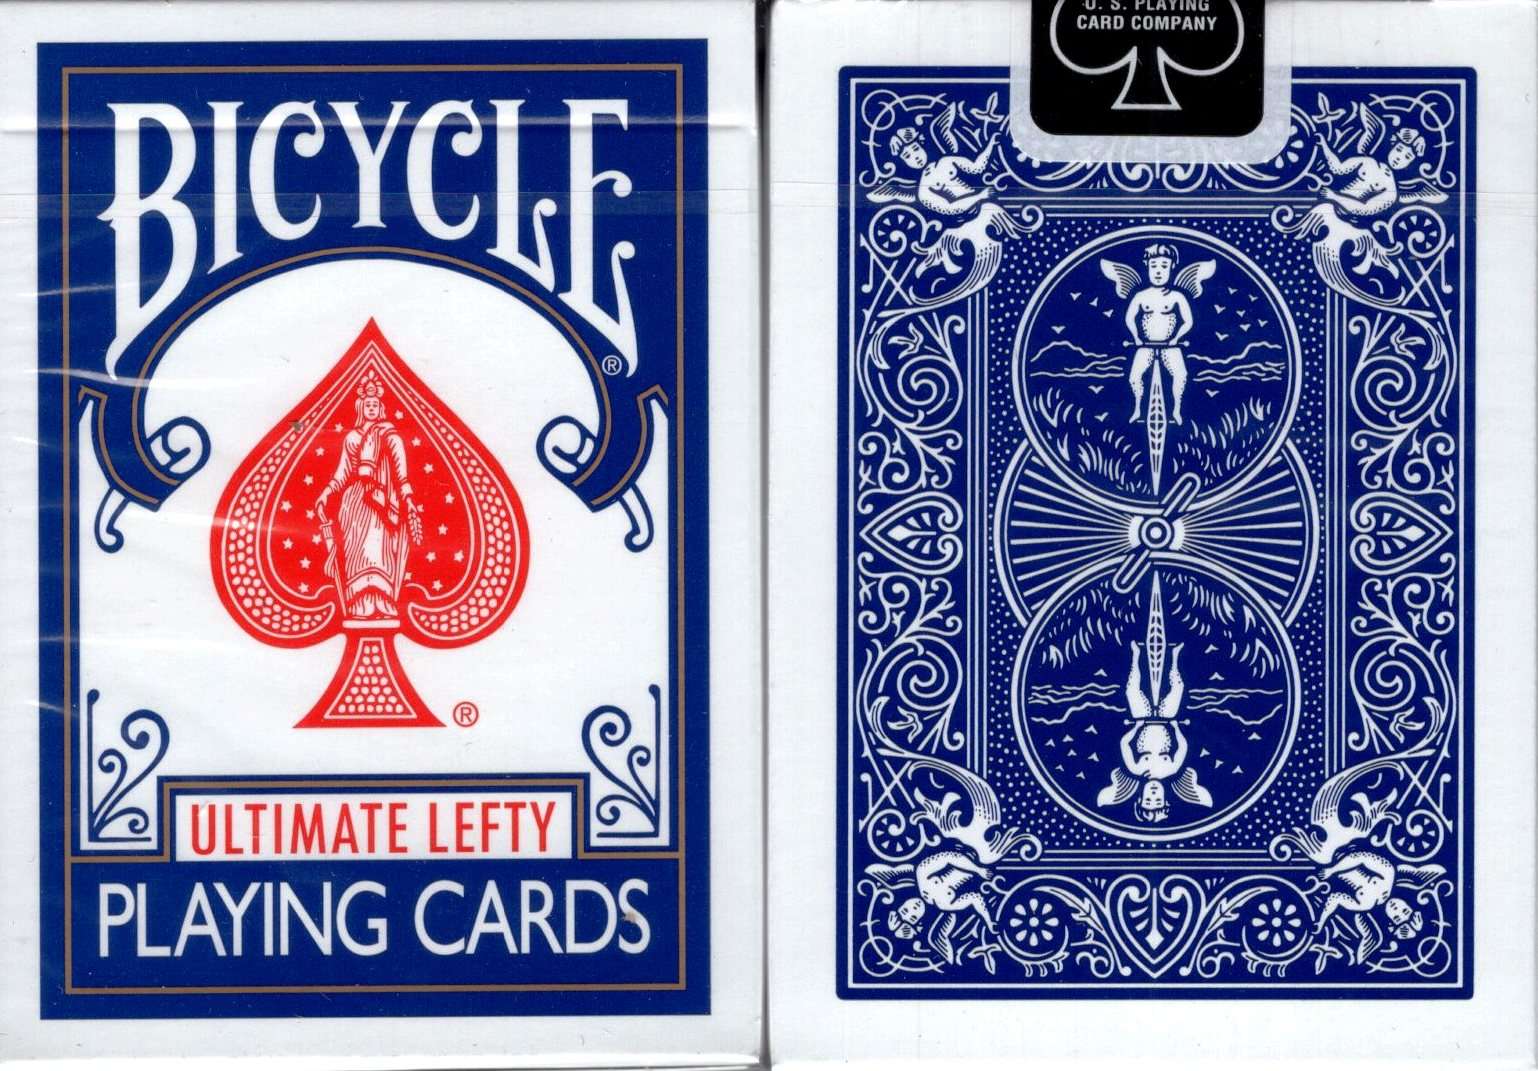 PlayingCardDecks.com-Ultimate Lefty Bicycle Playing Cards: Blue